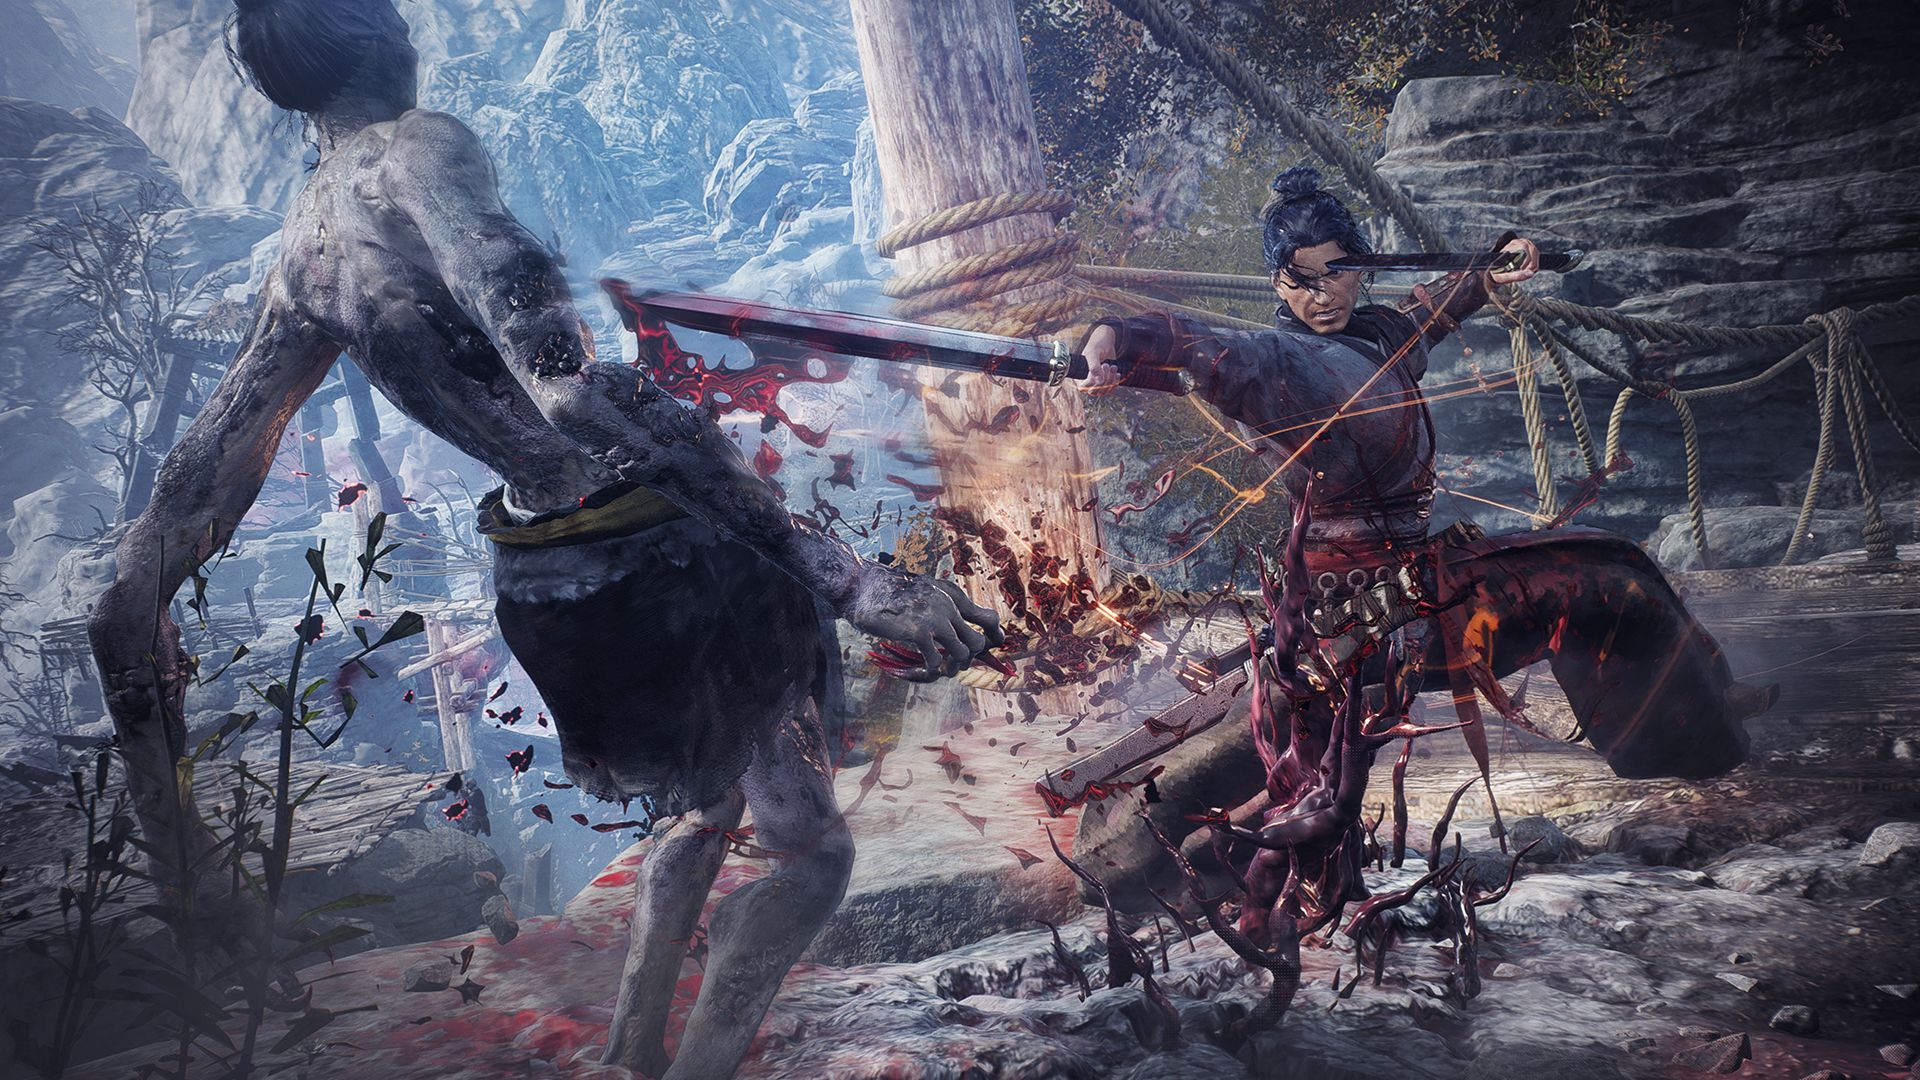 Video game screenshot of a man swinging a sword at a gray zombie